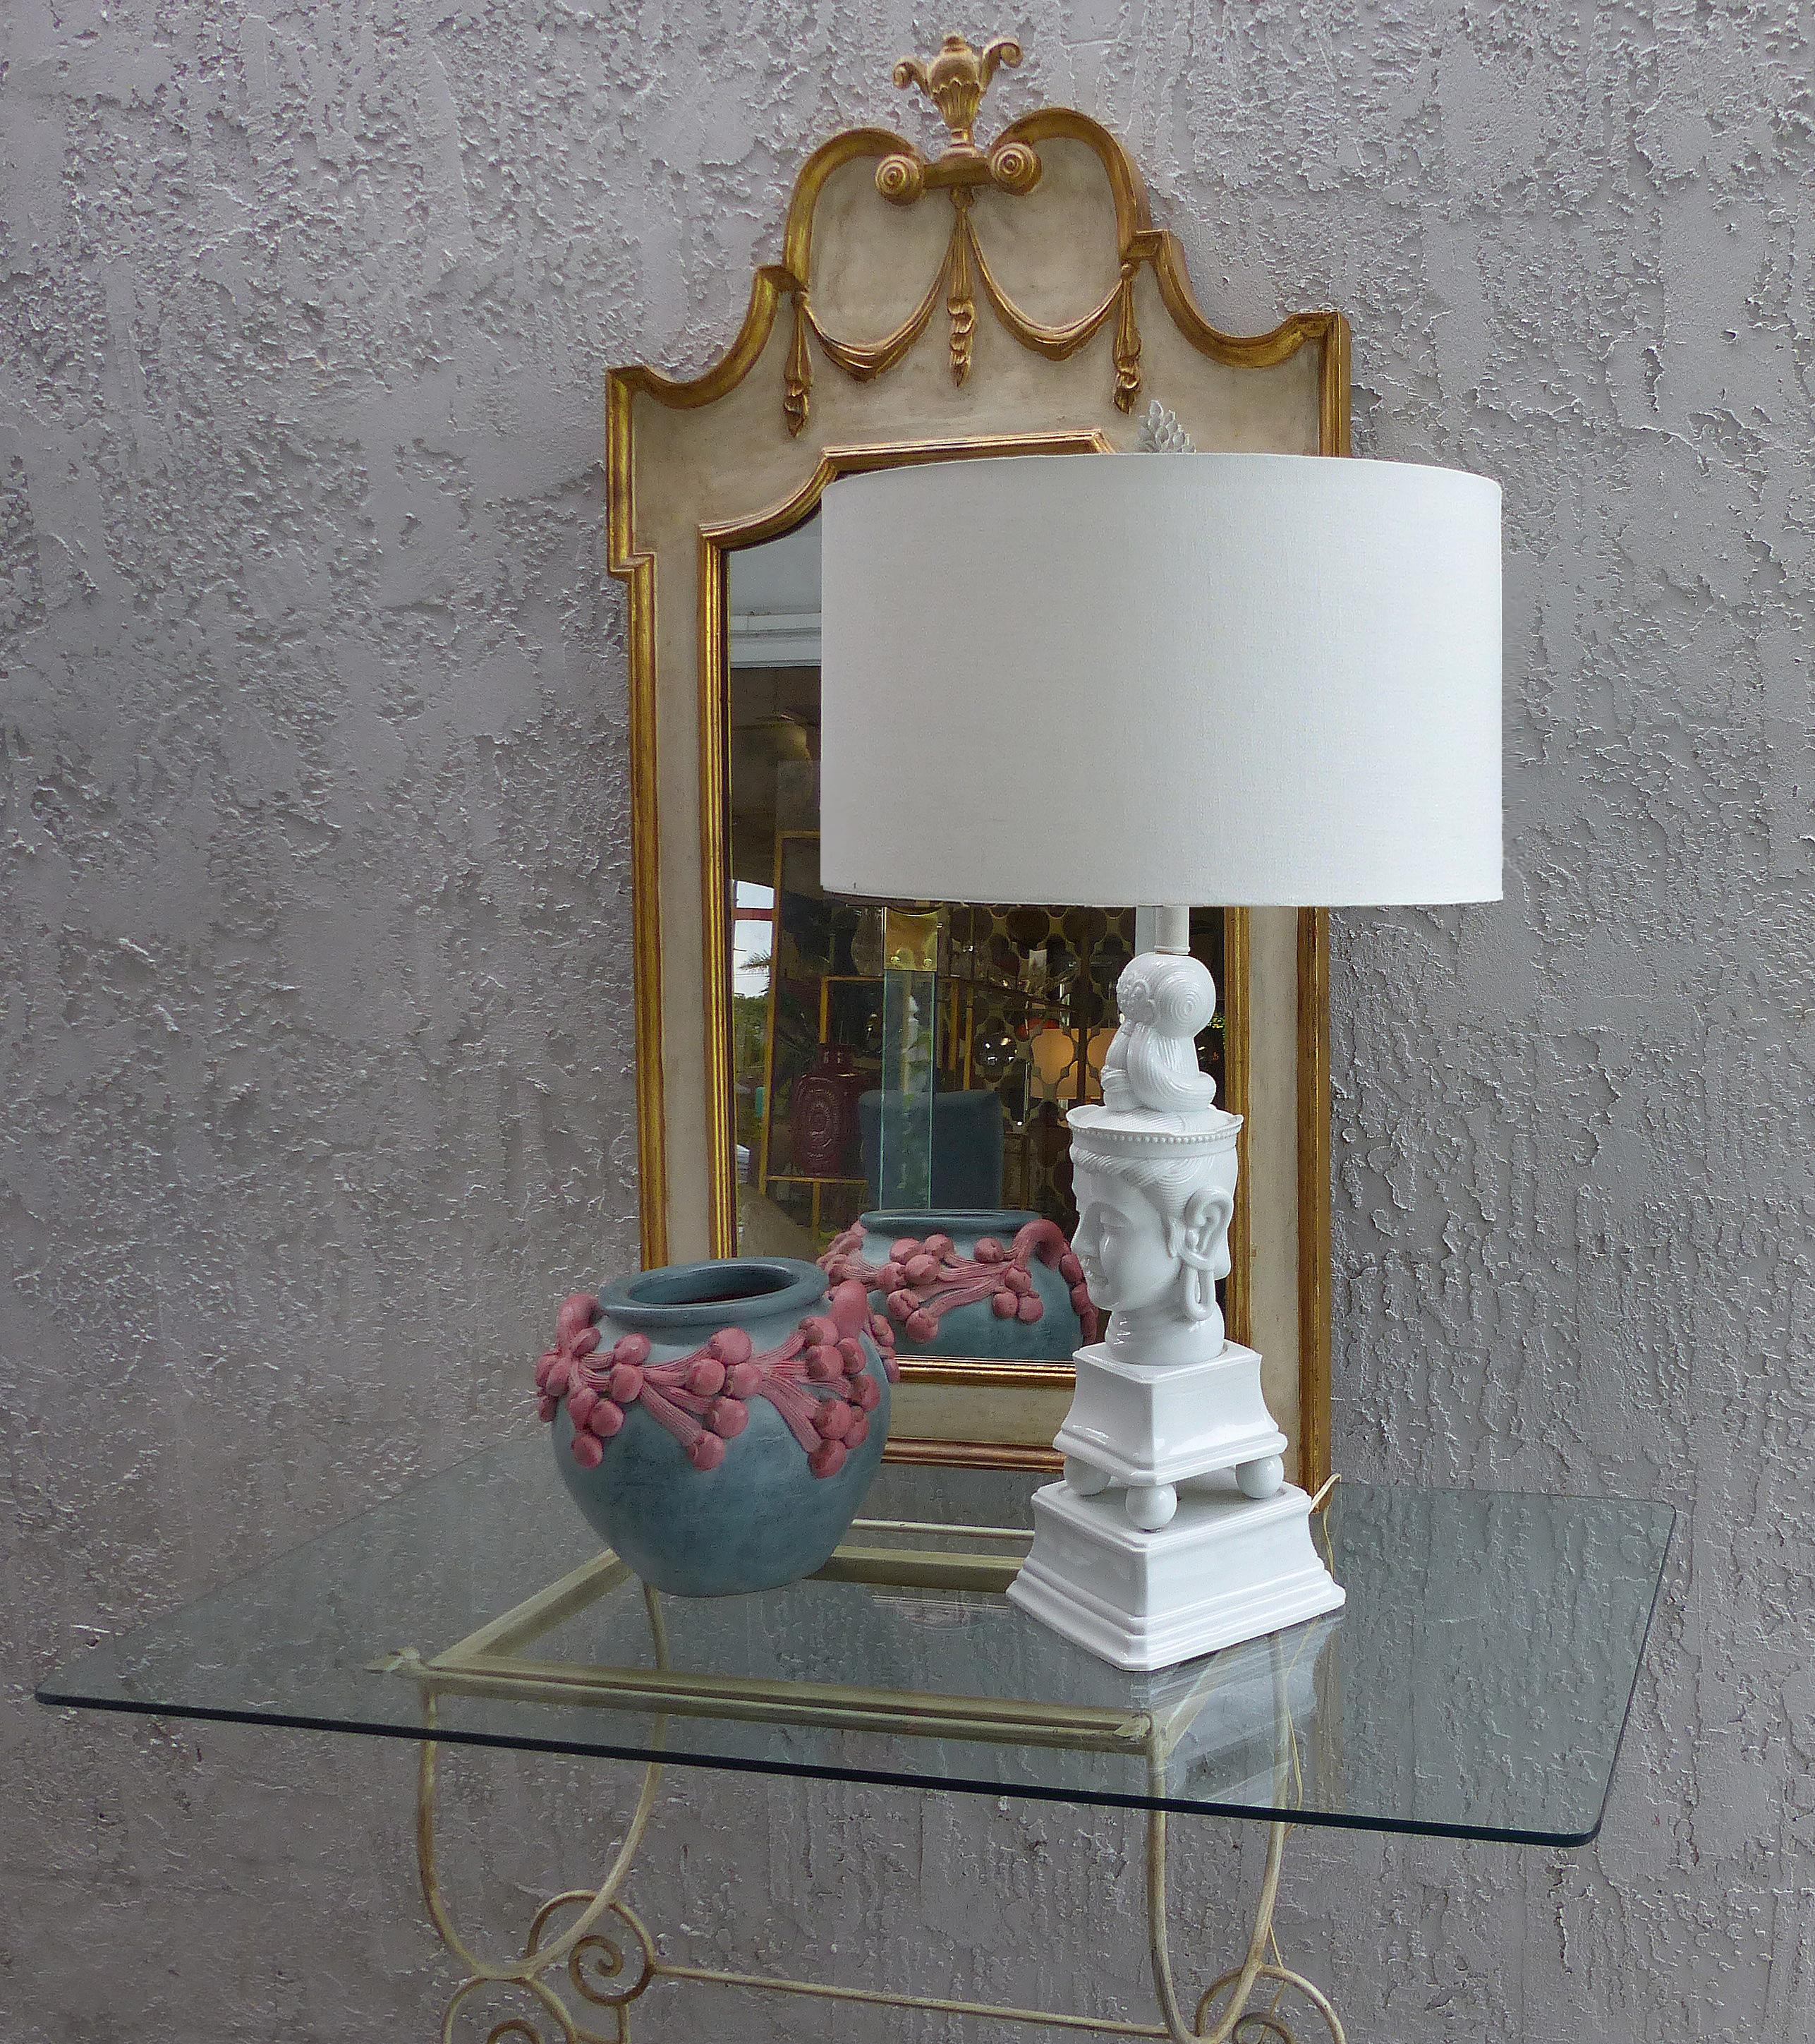 1960s Overscale Blanc de Chine Buddha Table Lamp

Offered for sale is a rare overscaled 1960s Blanc de Chine porcelain Buddha lamp with great details. The lamp is completed with a finial appropriate to the far east style. The lamp is now being